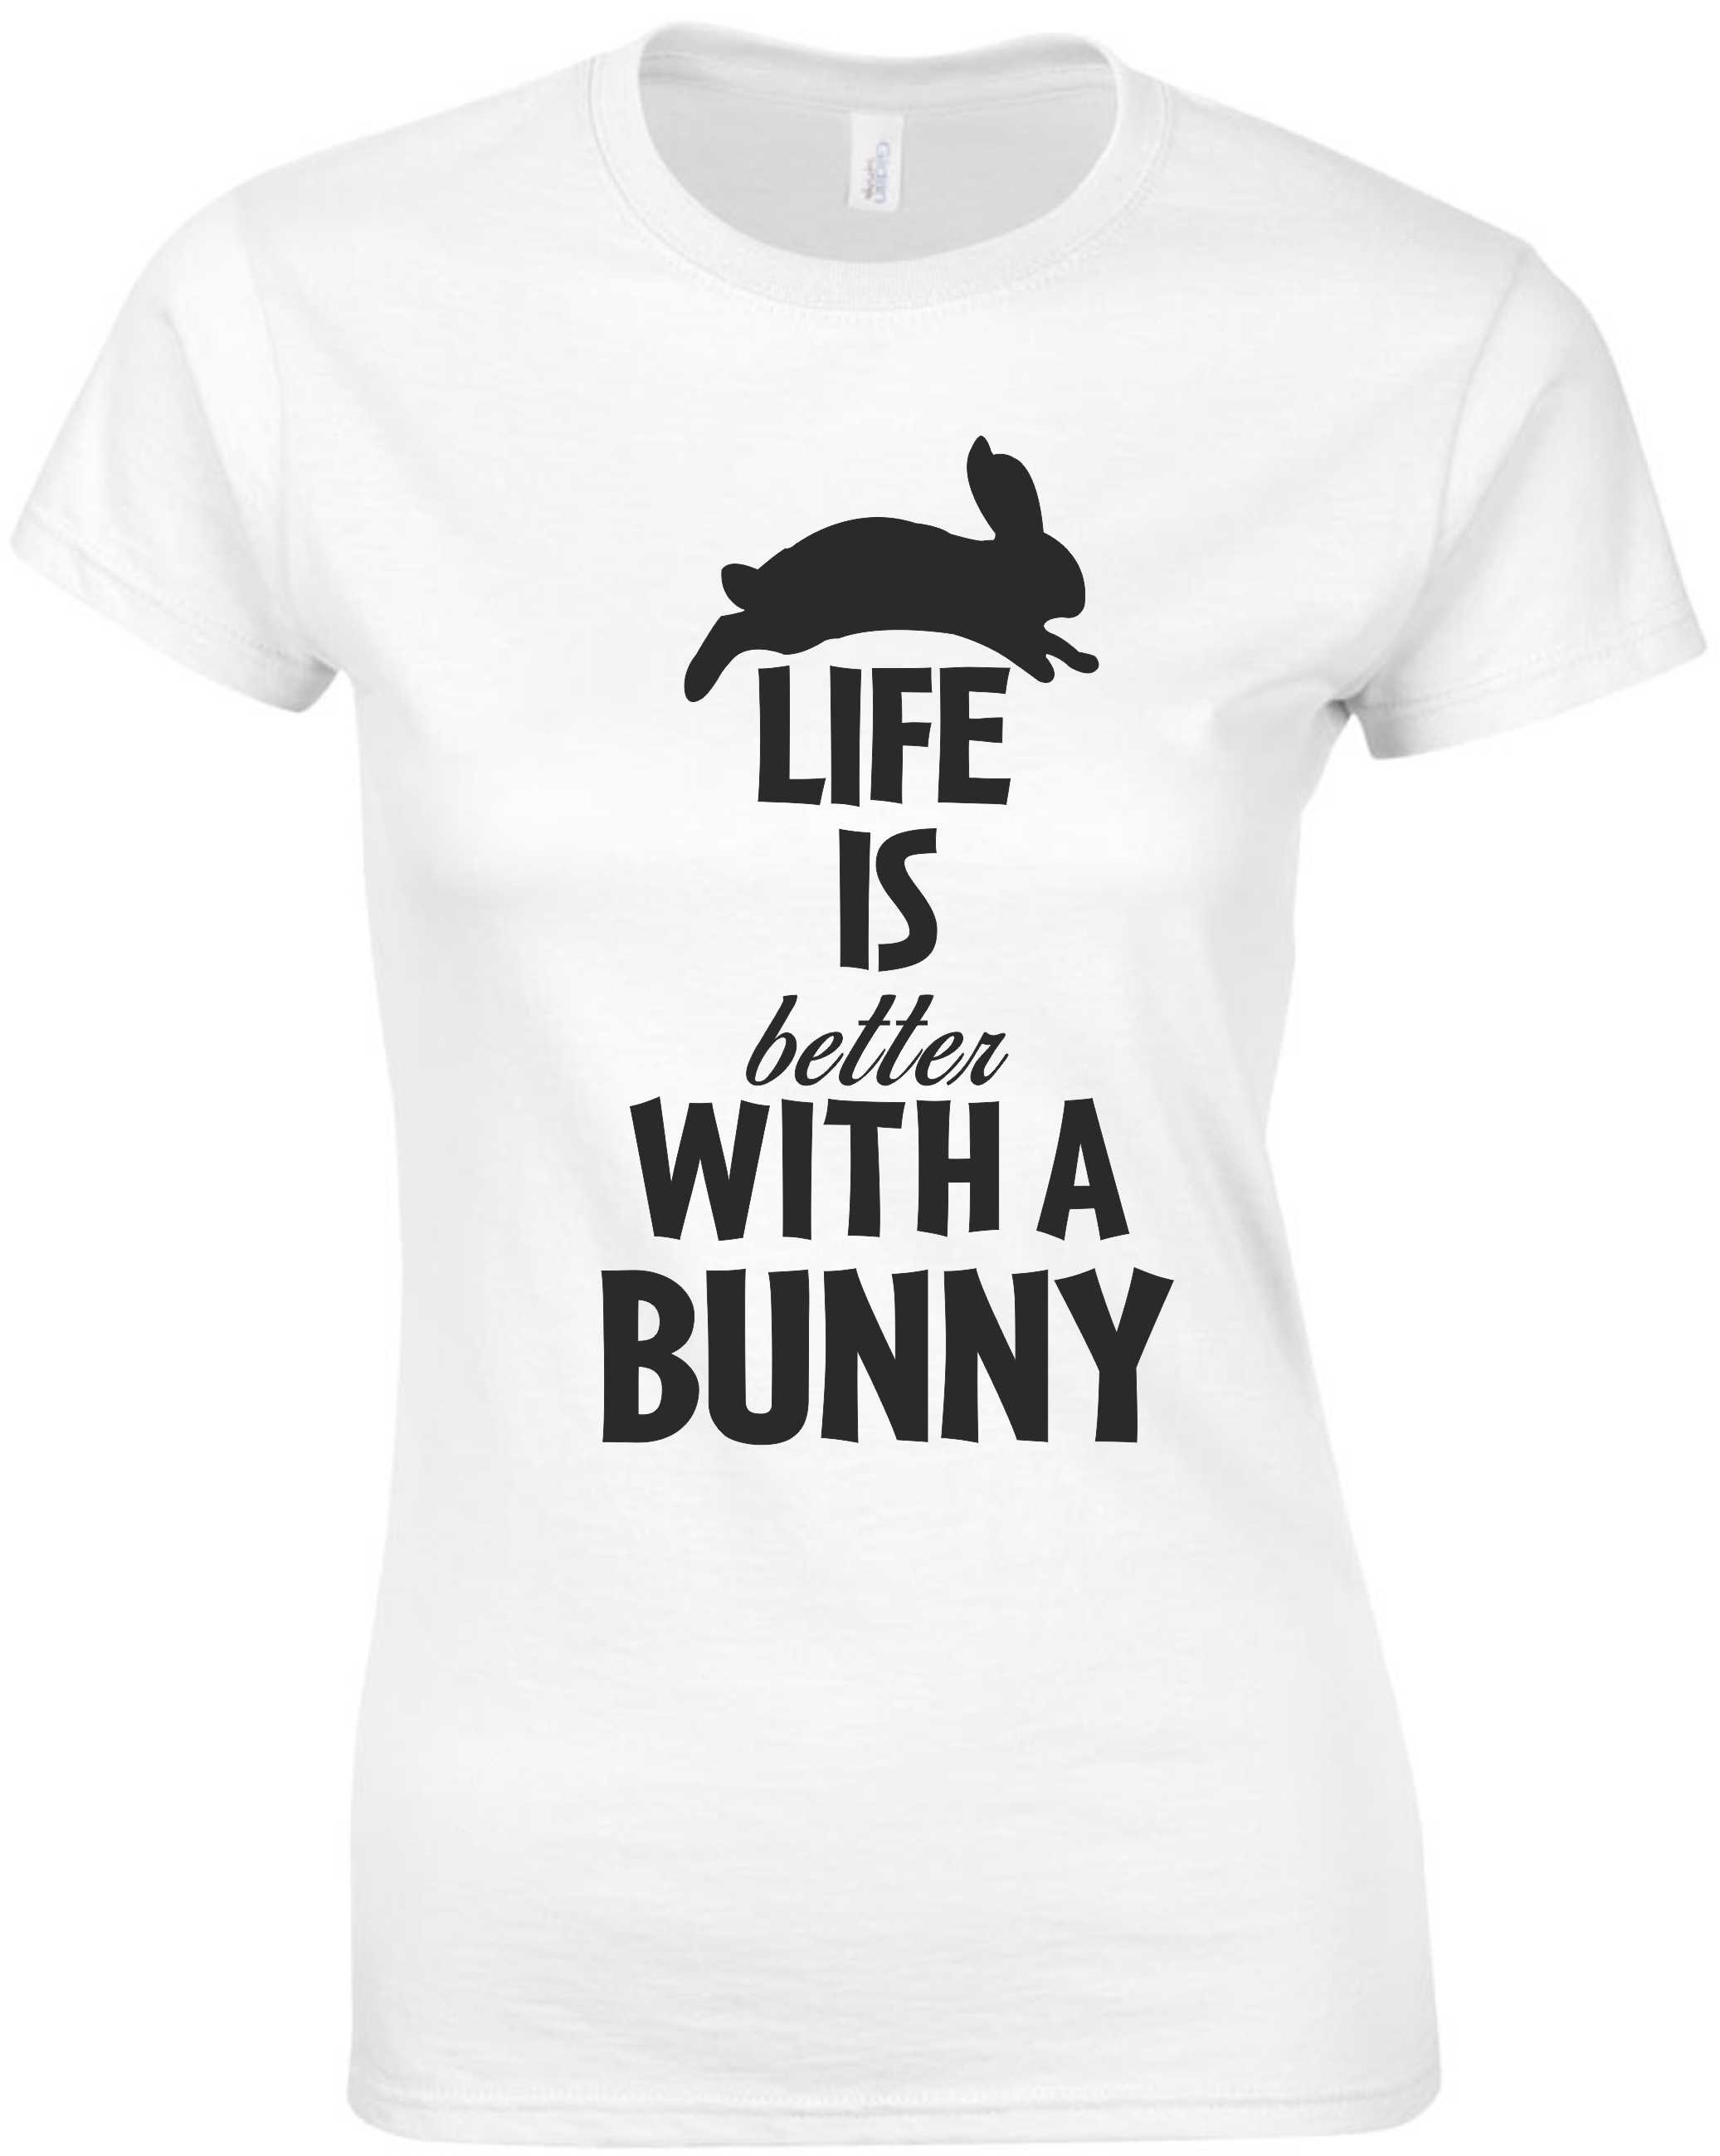 LIFE IS BETTER WITH A BUNNY PÓLÓ